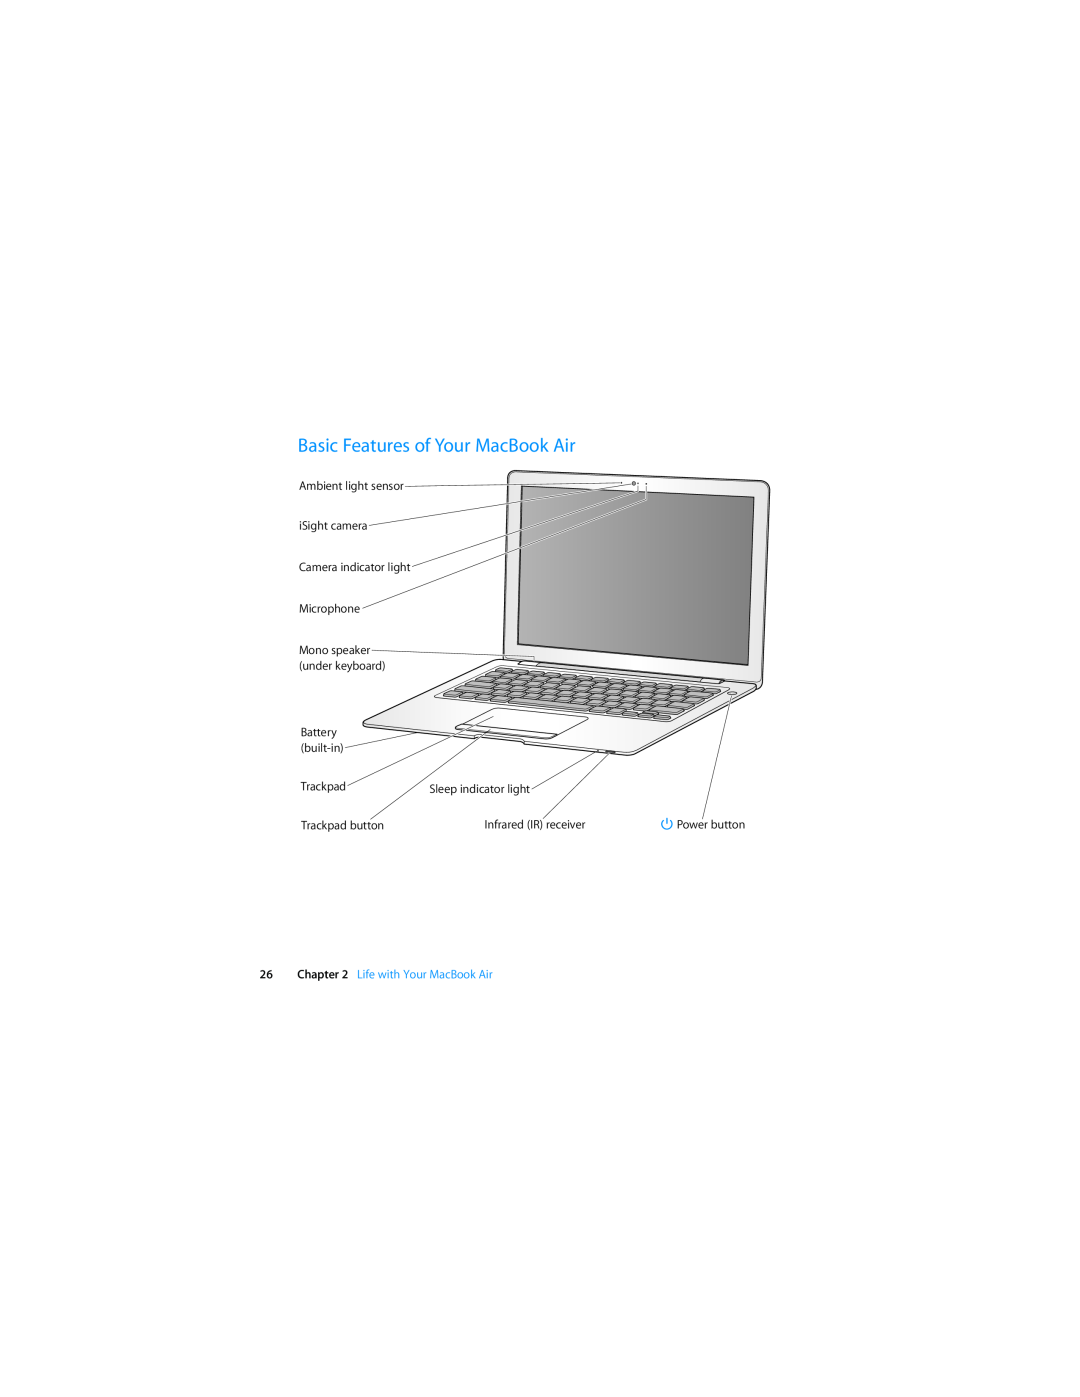 Apple MC233LL/A, MB003LL/A manual Basic Features of Your MacBook Air, Life with Your MacBook Air 